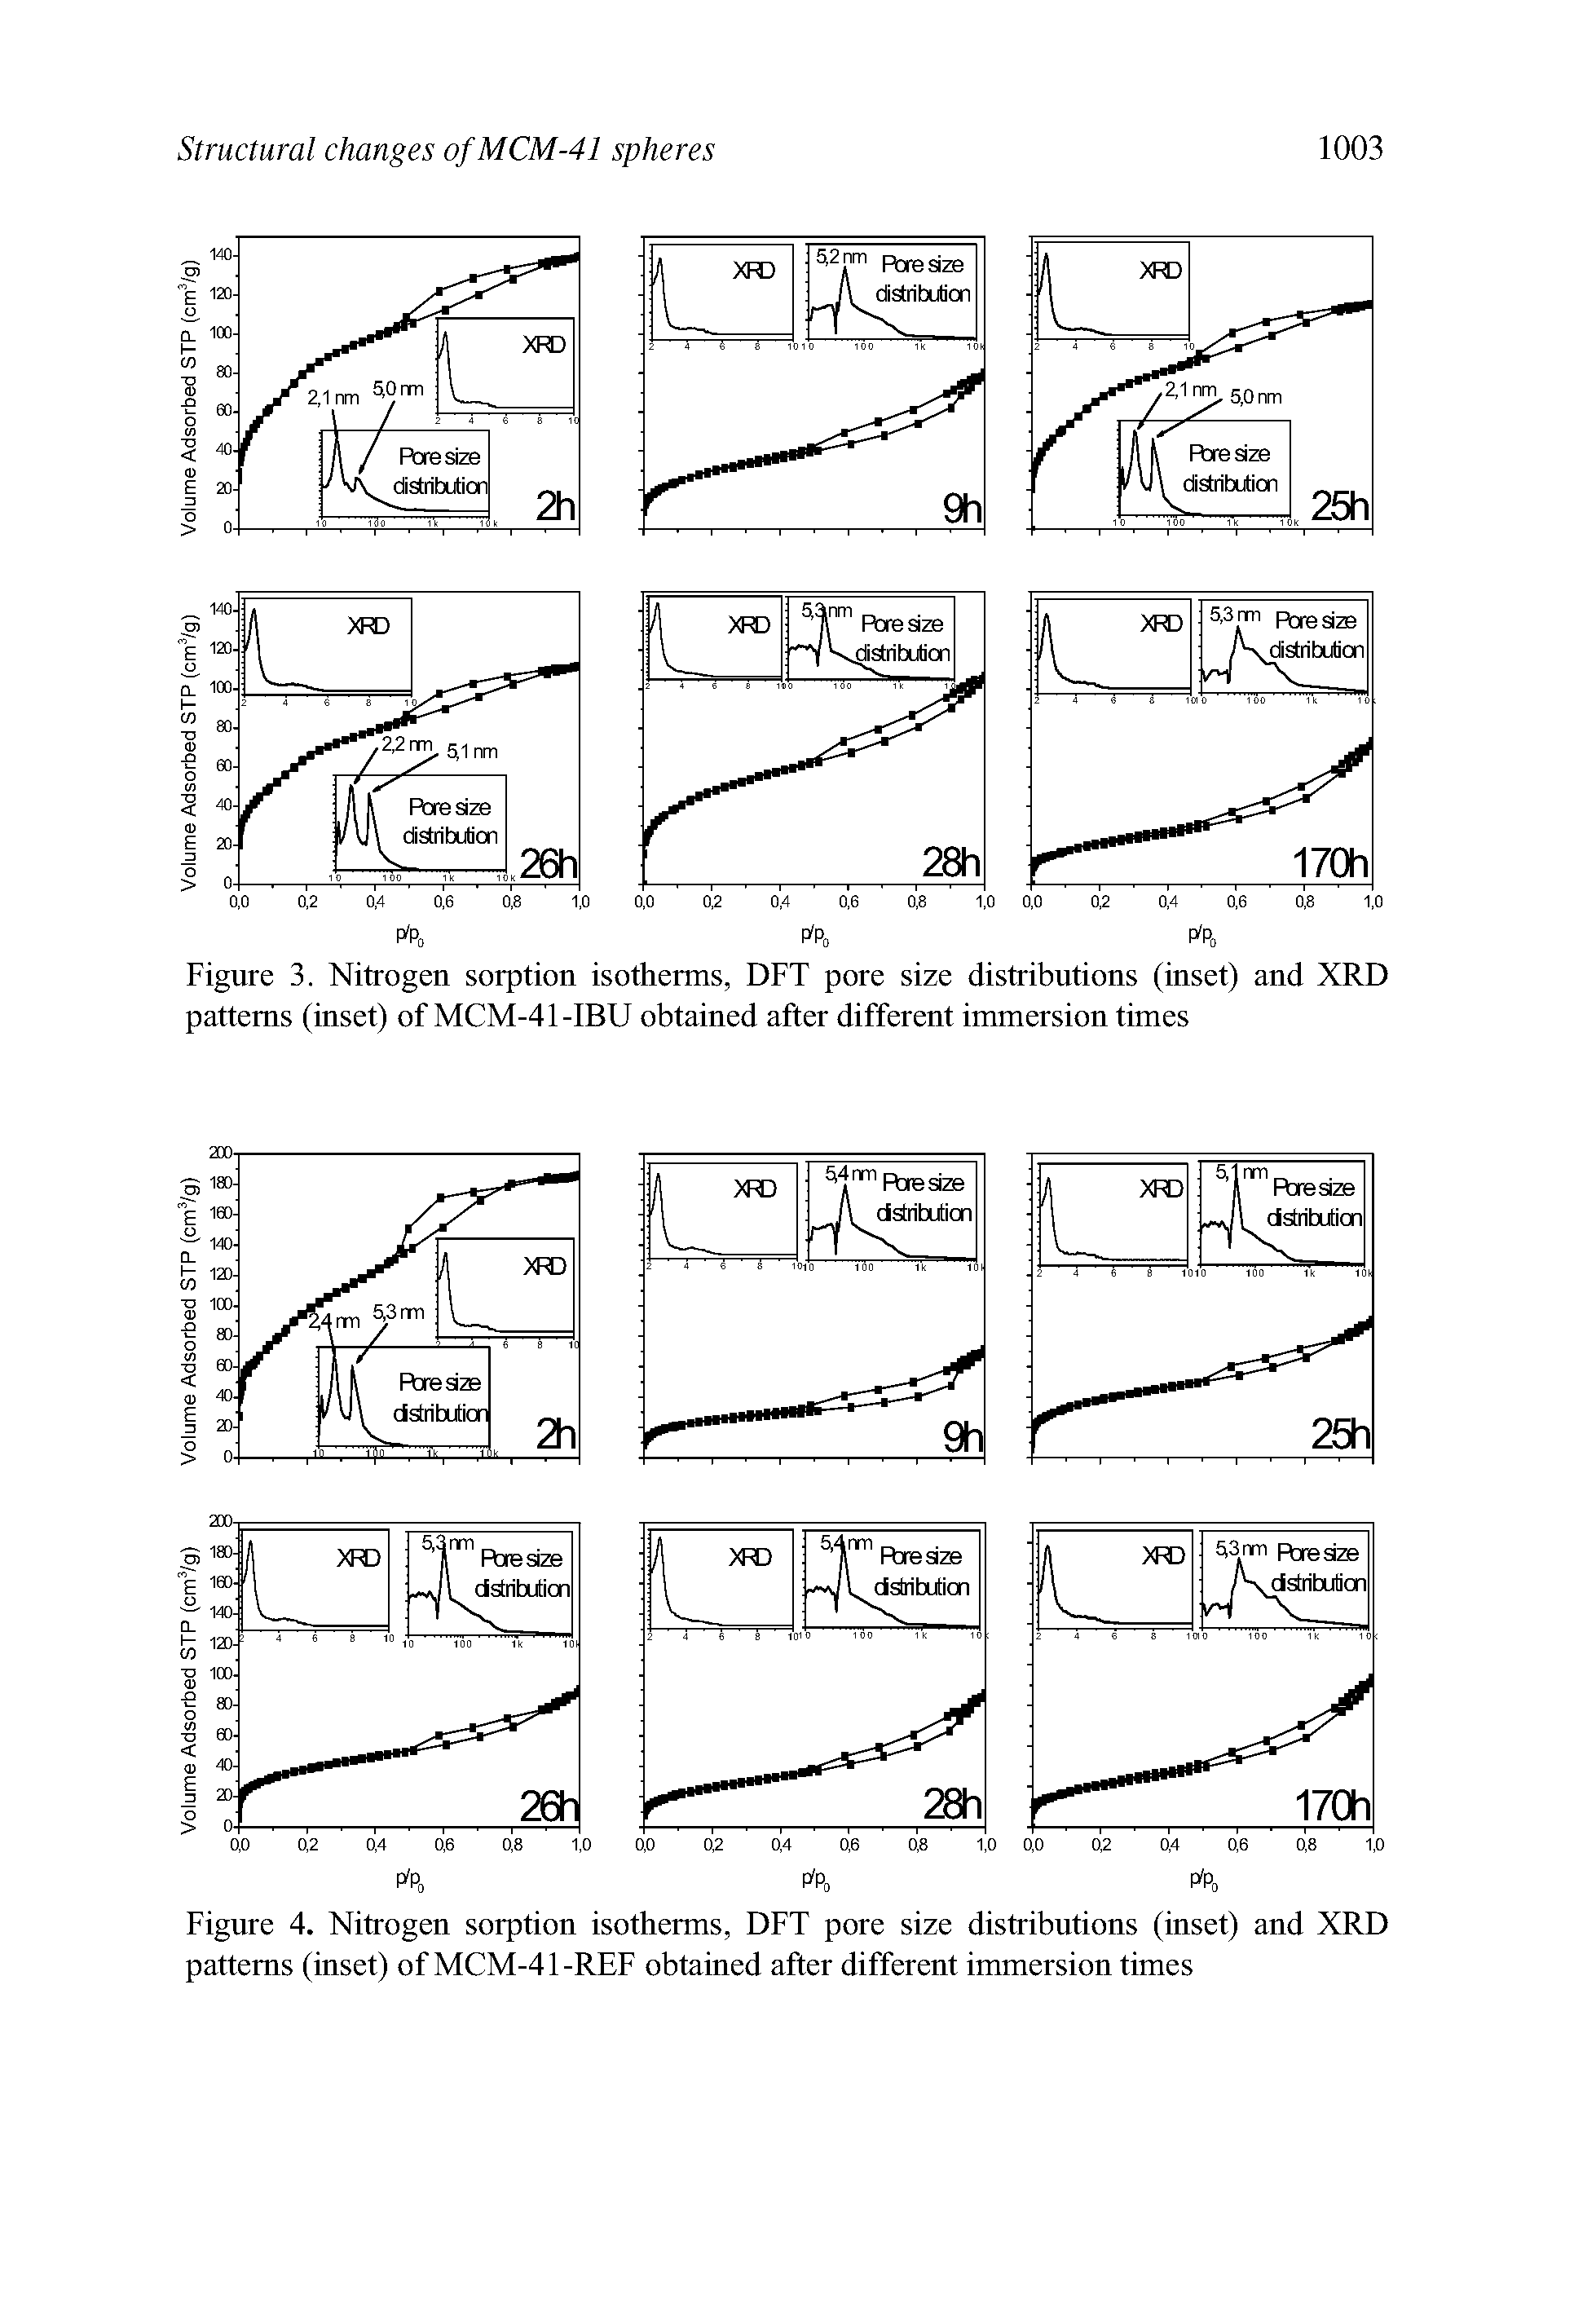 Figure 3. Nitrogen sorption isotherms, DFT pore size distributions (inset) and XRD patterns (inset) of MCM-41-IBU obtained after different immersion times...